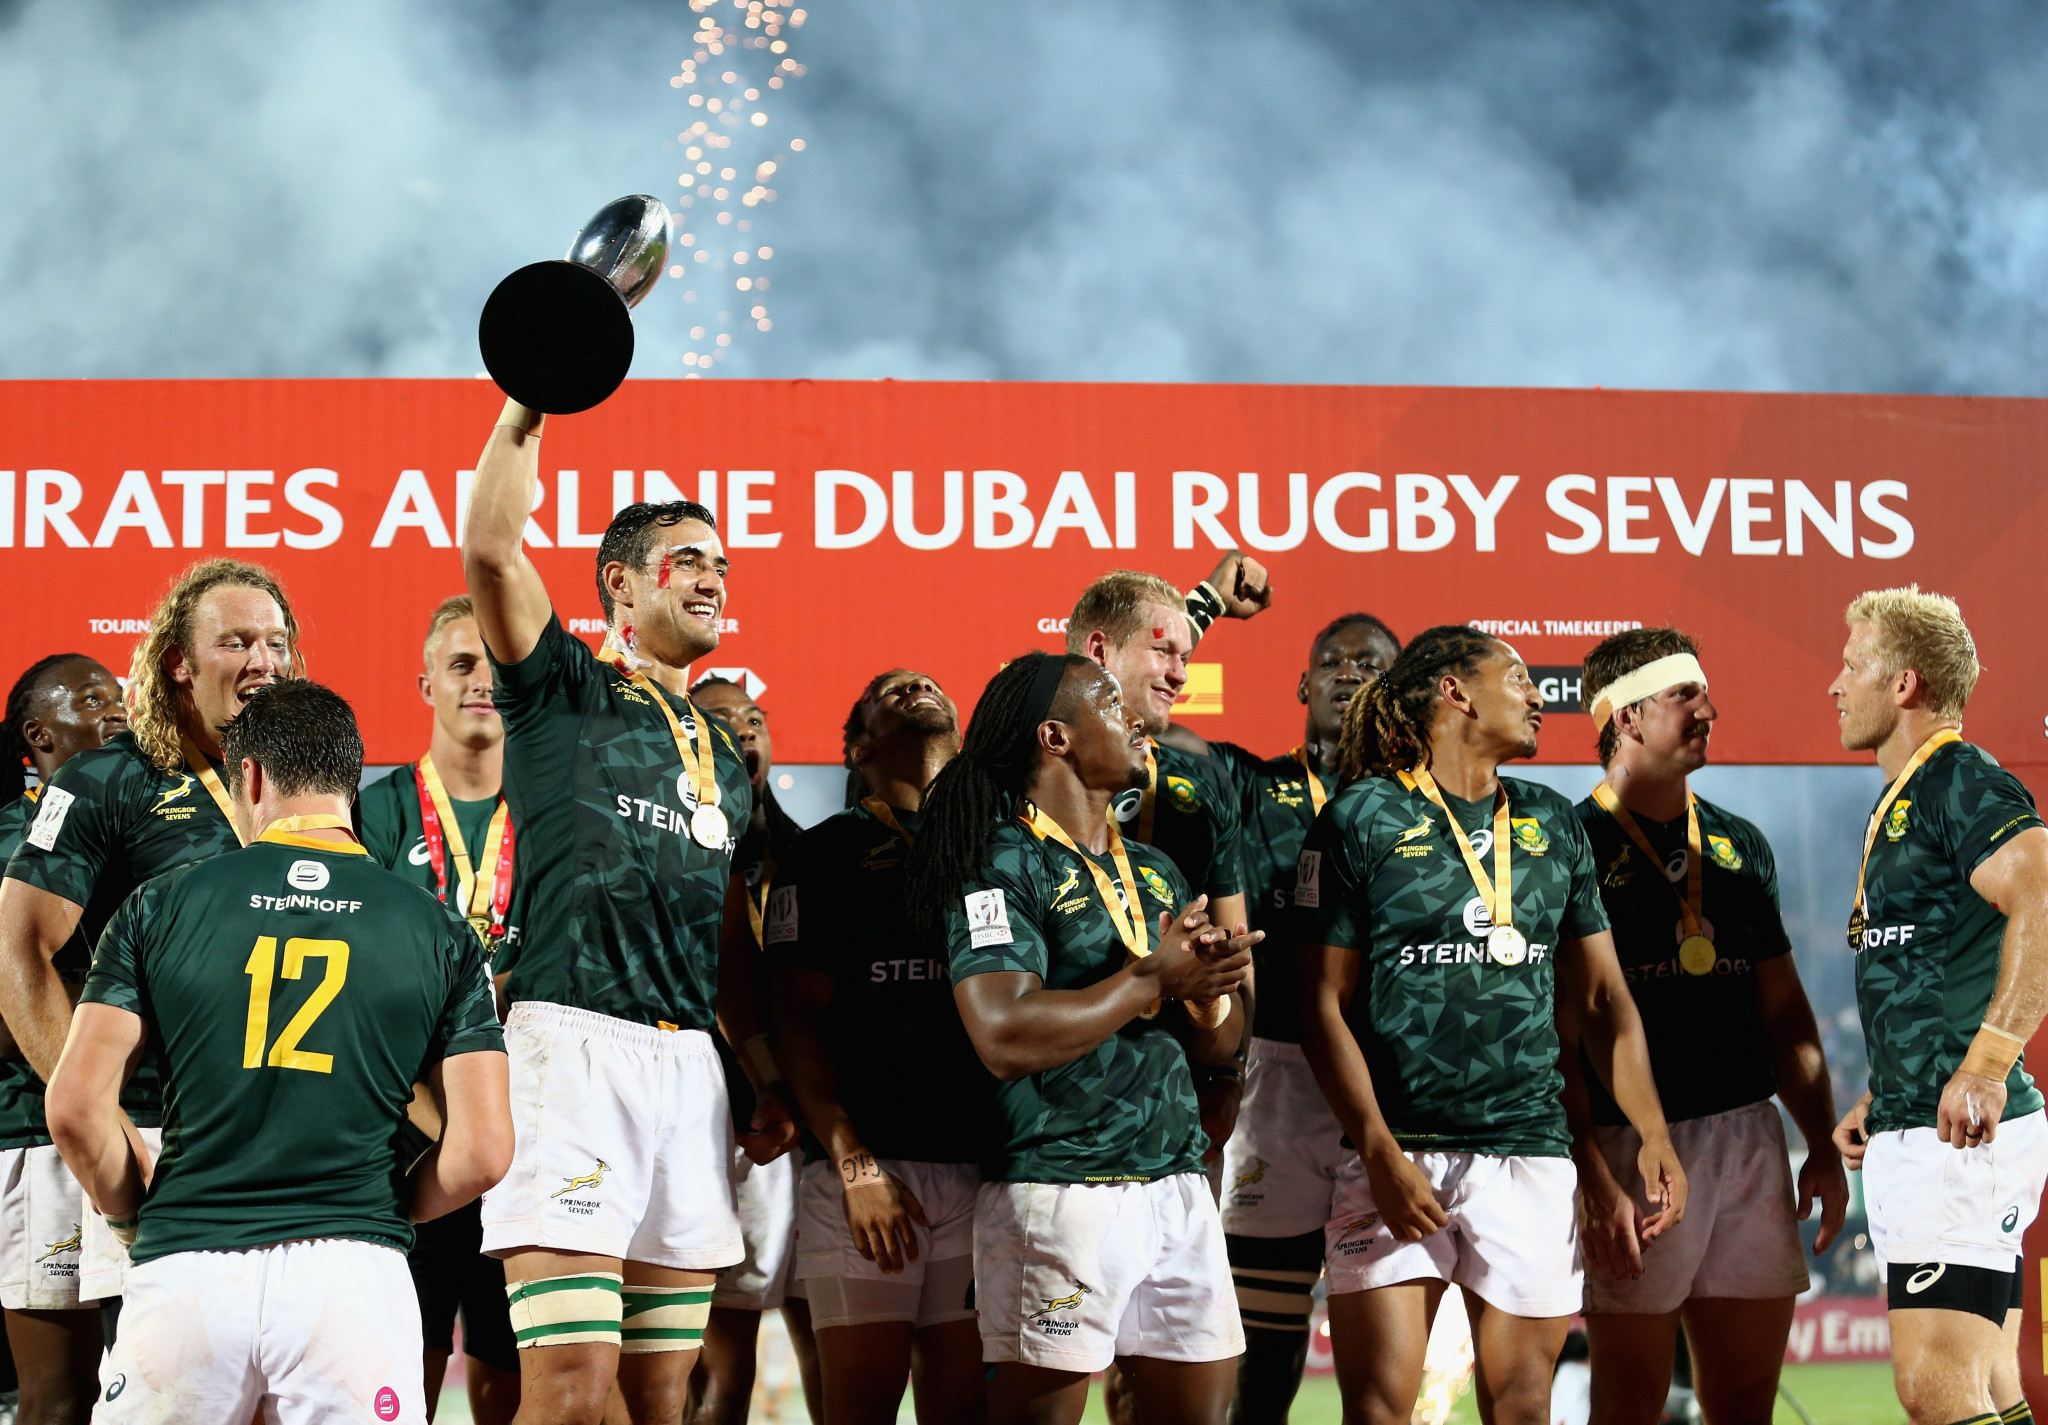 South Africa celebrates after winning the Dubai Rugby Sevens World Series ©Getty Images